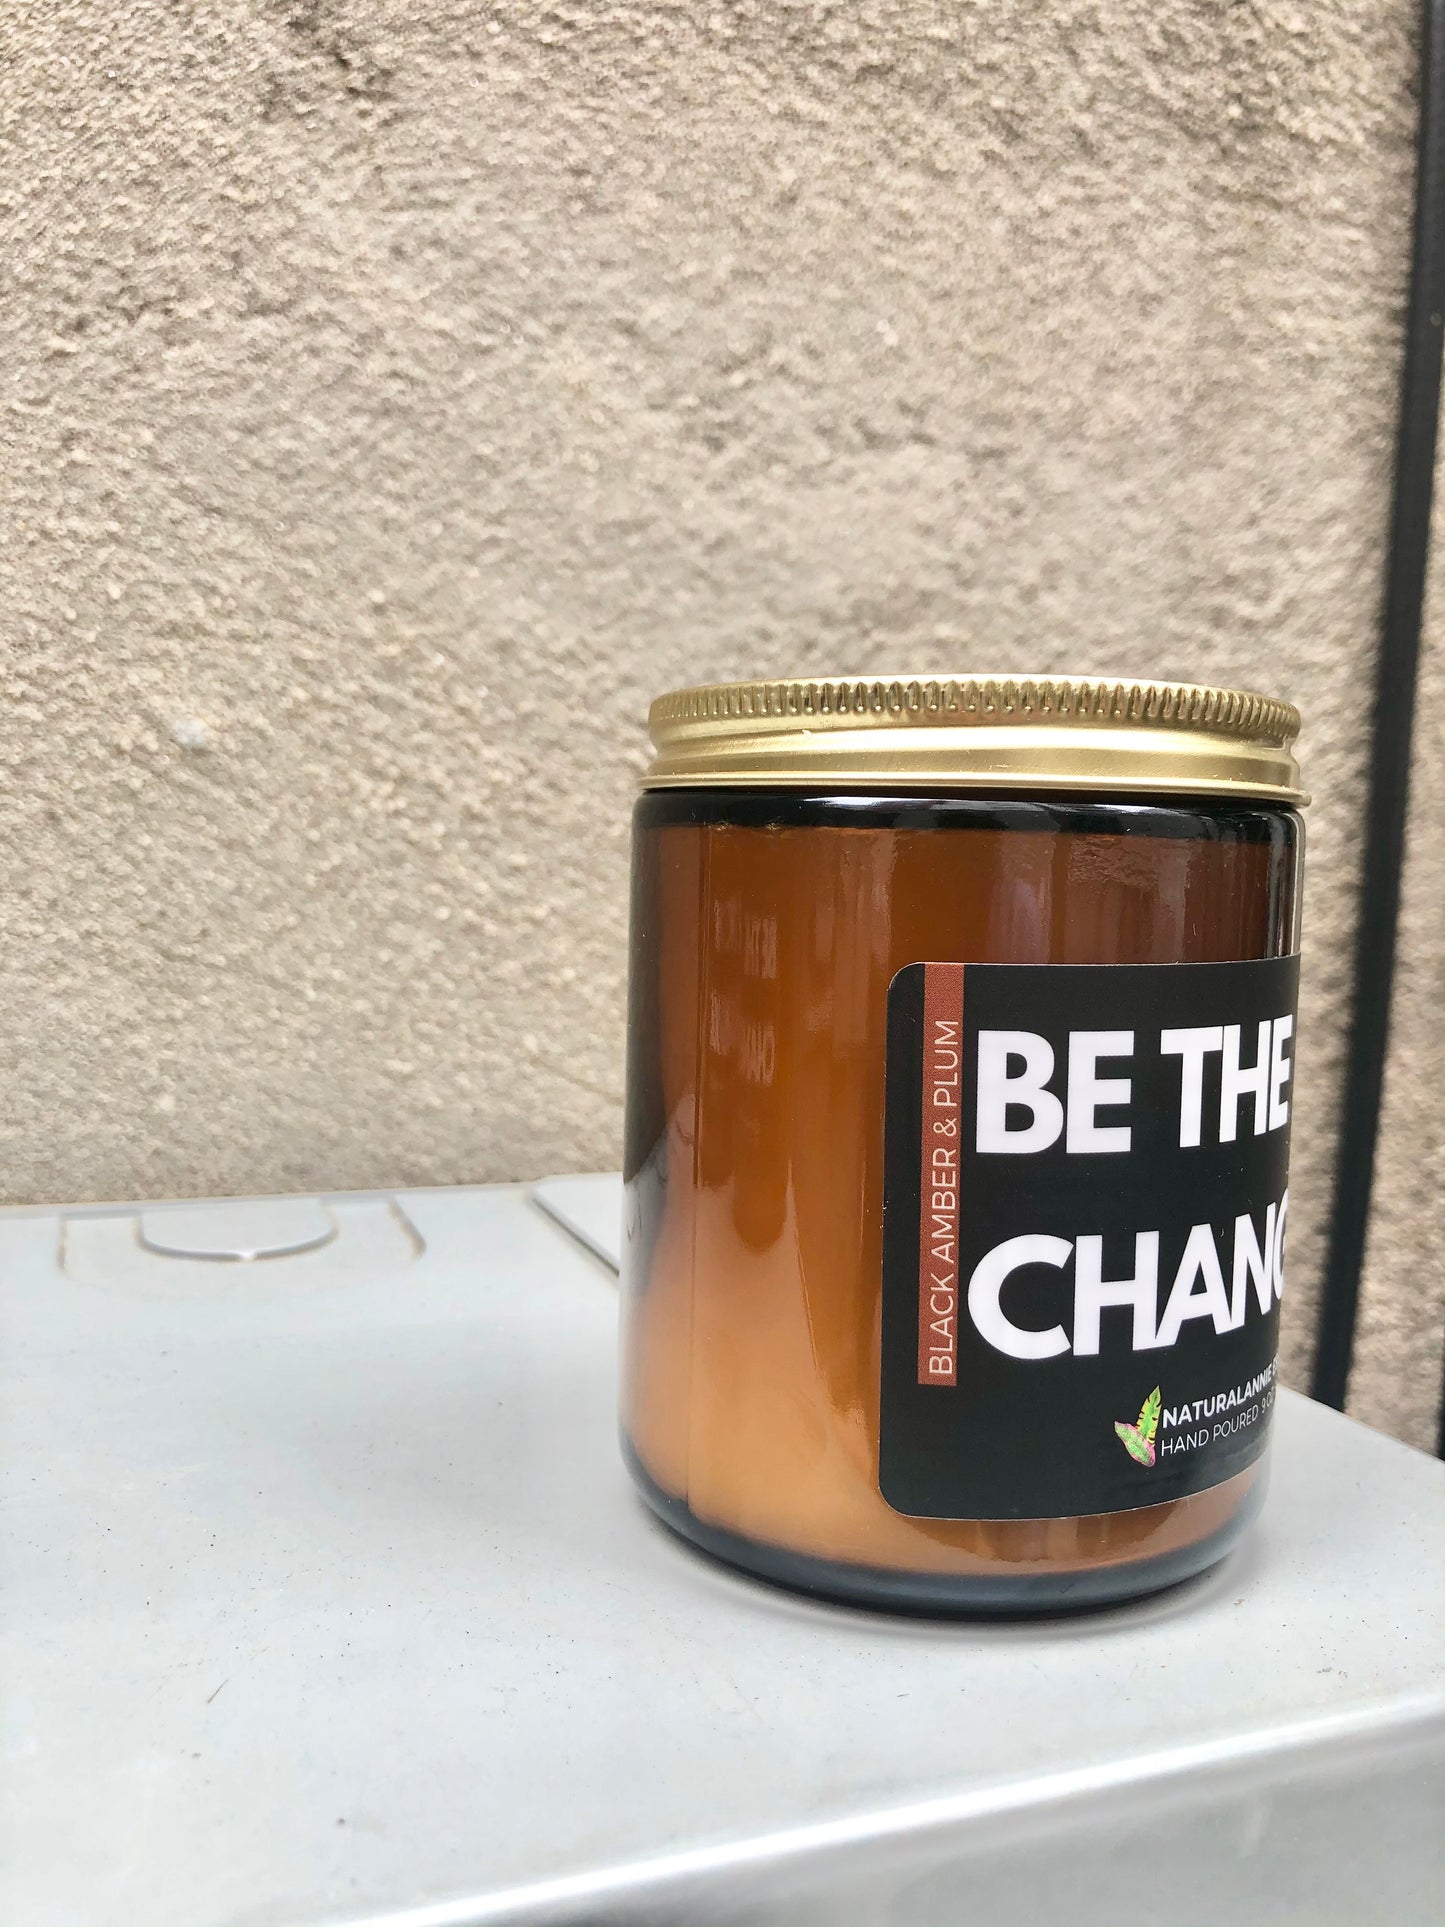 Be the Change 9oz Soy Candle (options)